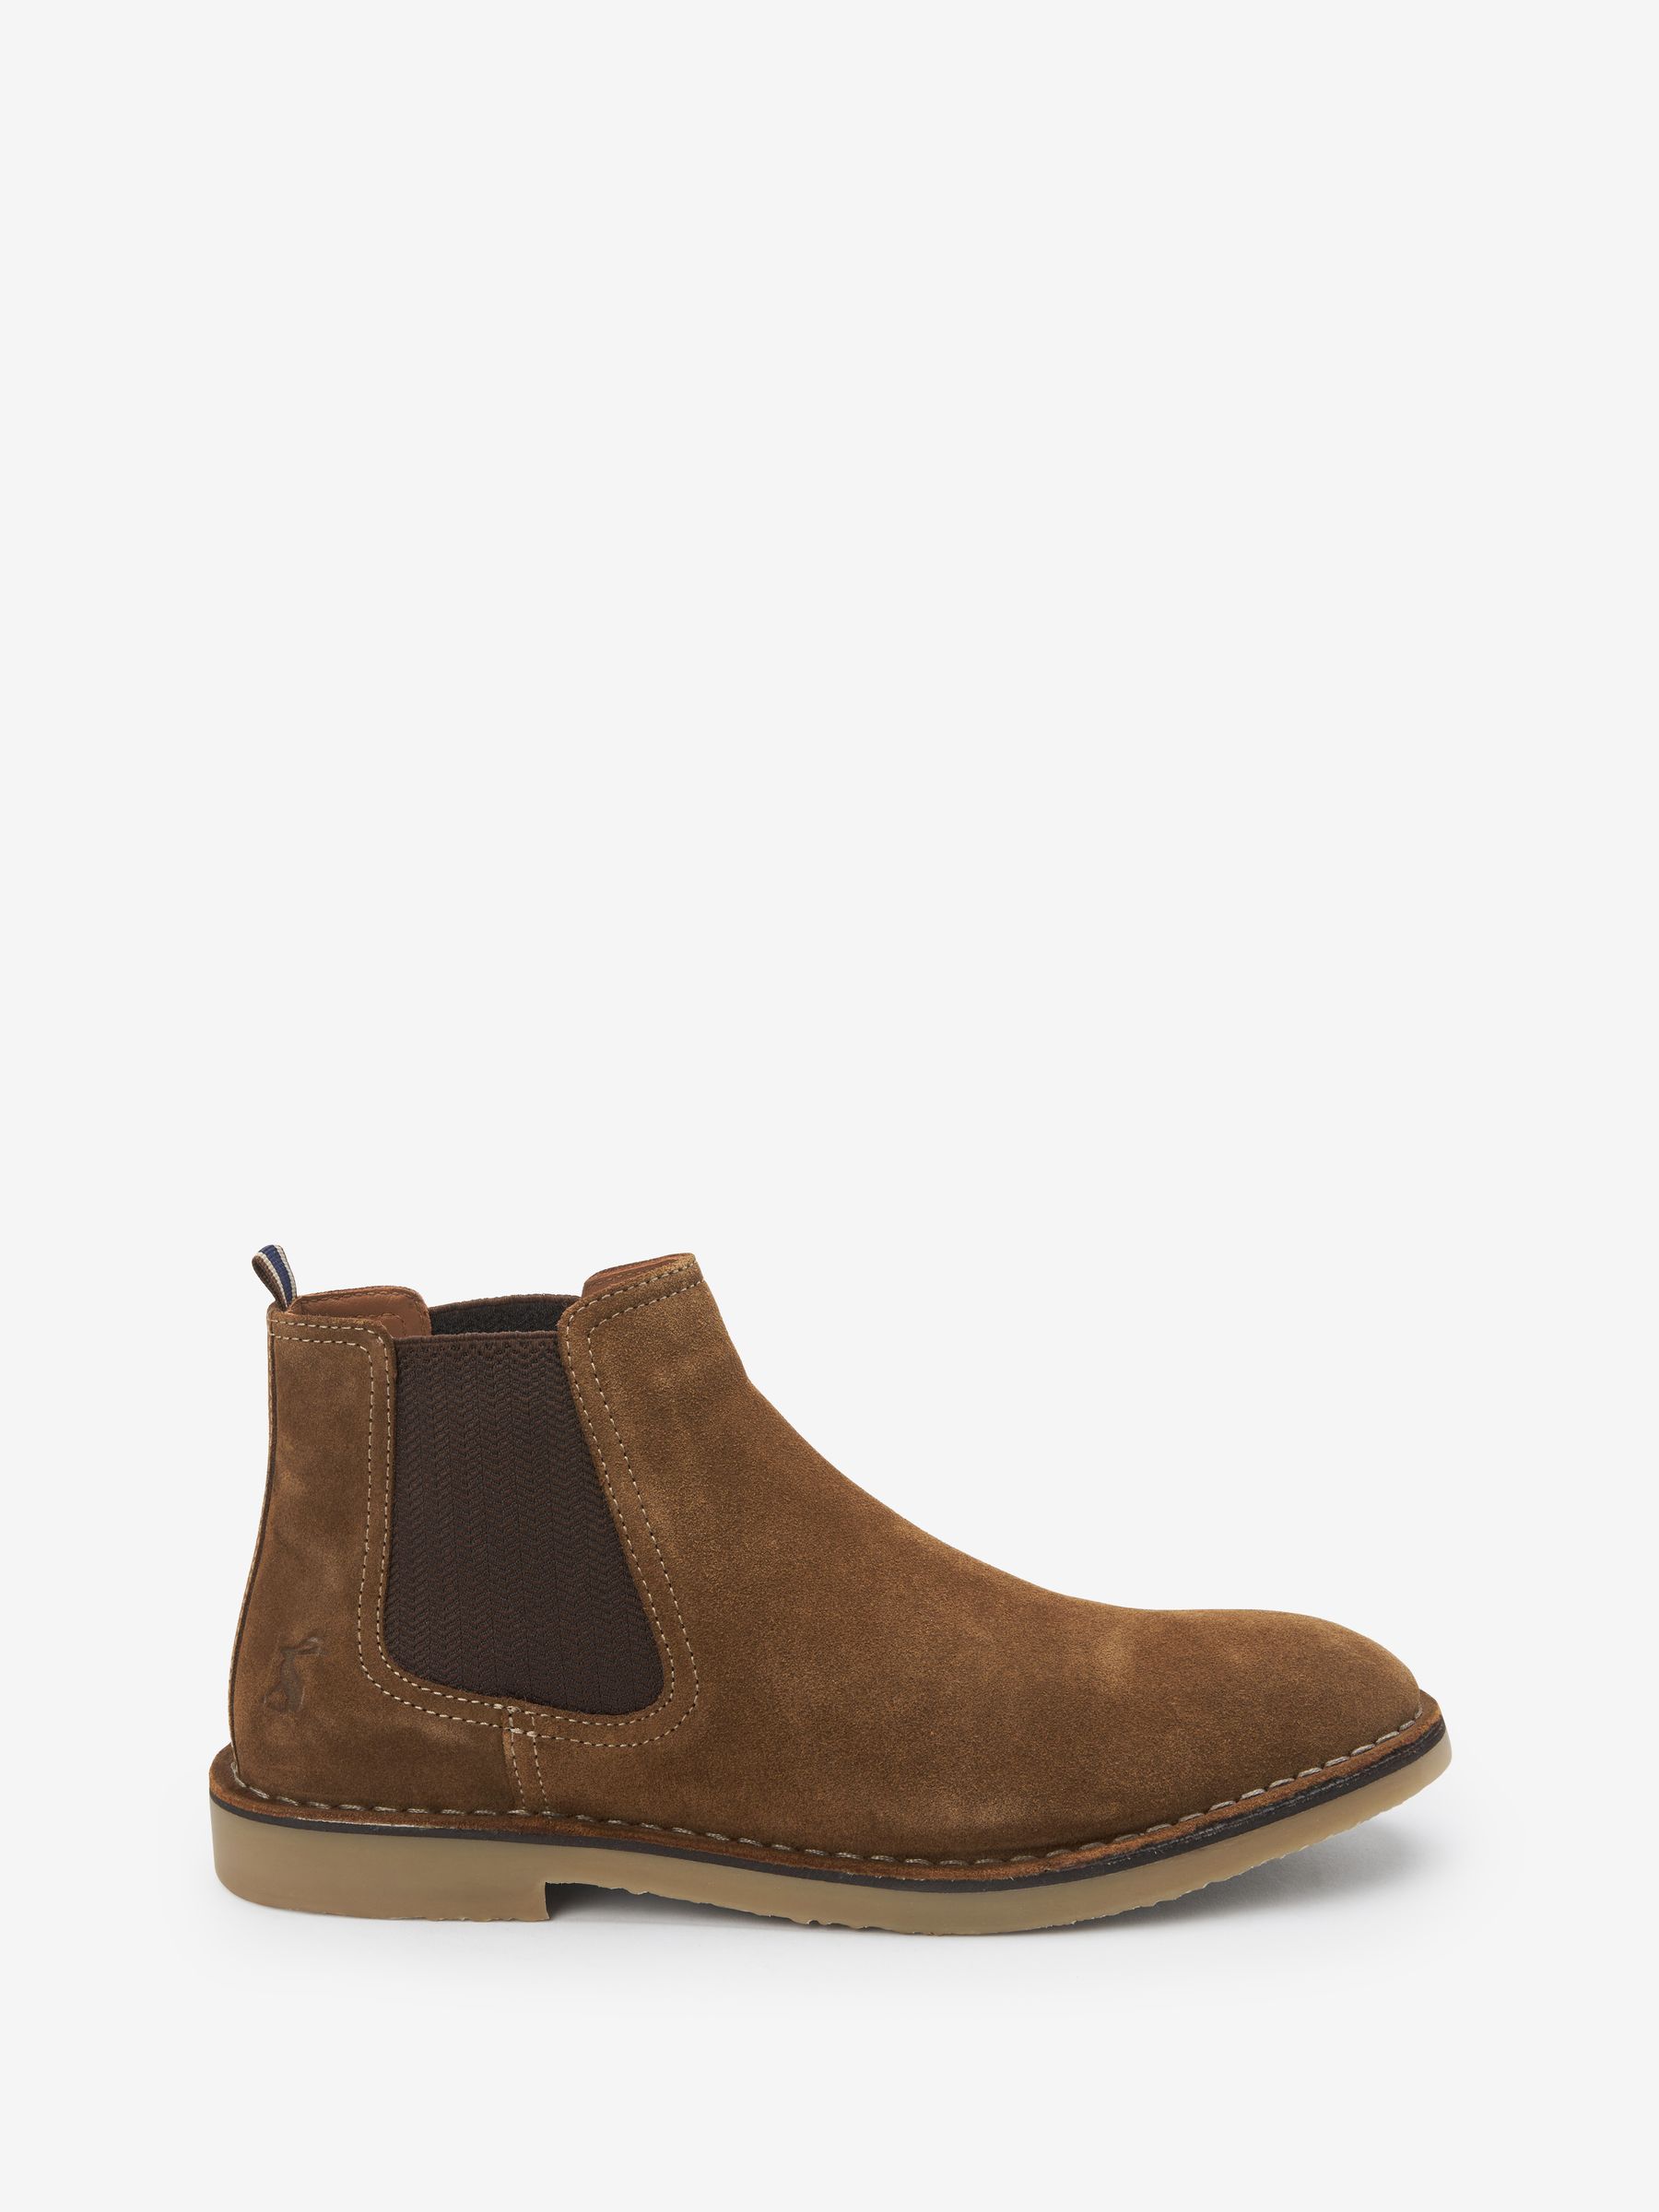 Buy Joules Suede Chelsea Boots from the Joules online shop